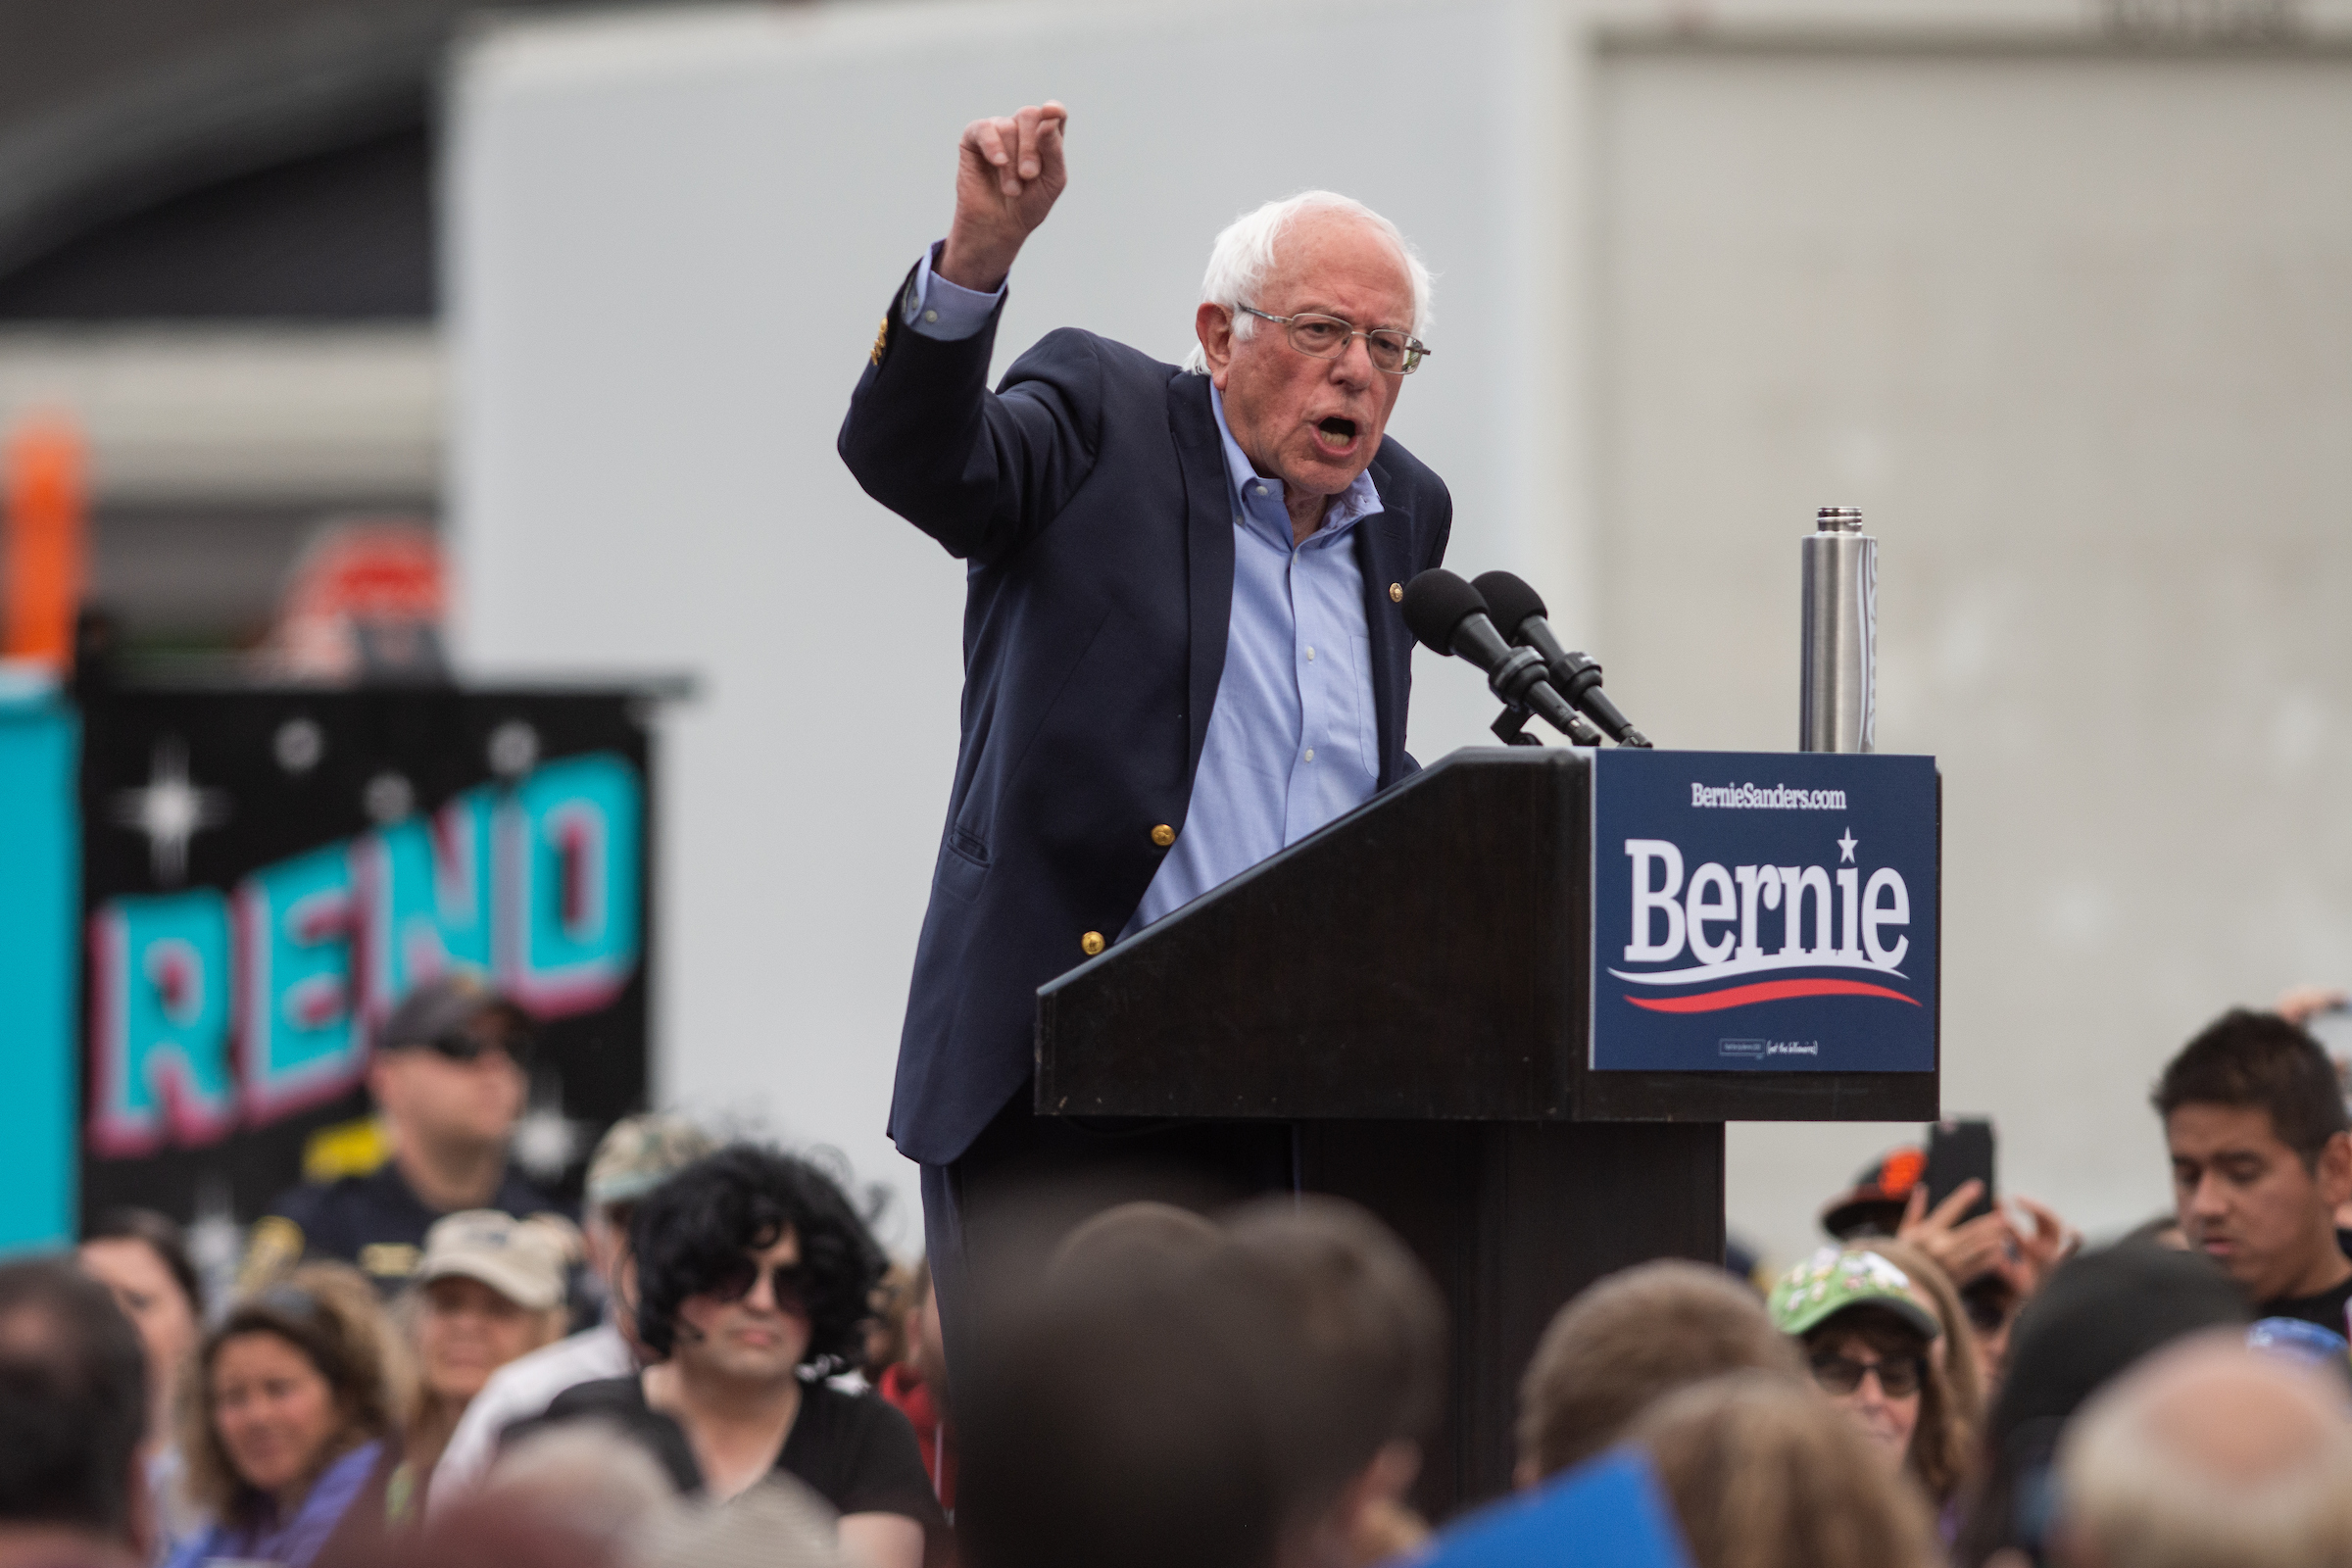 Bernie Sanders at a podium during a rally